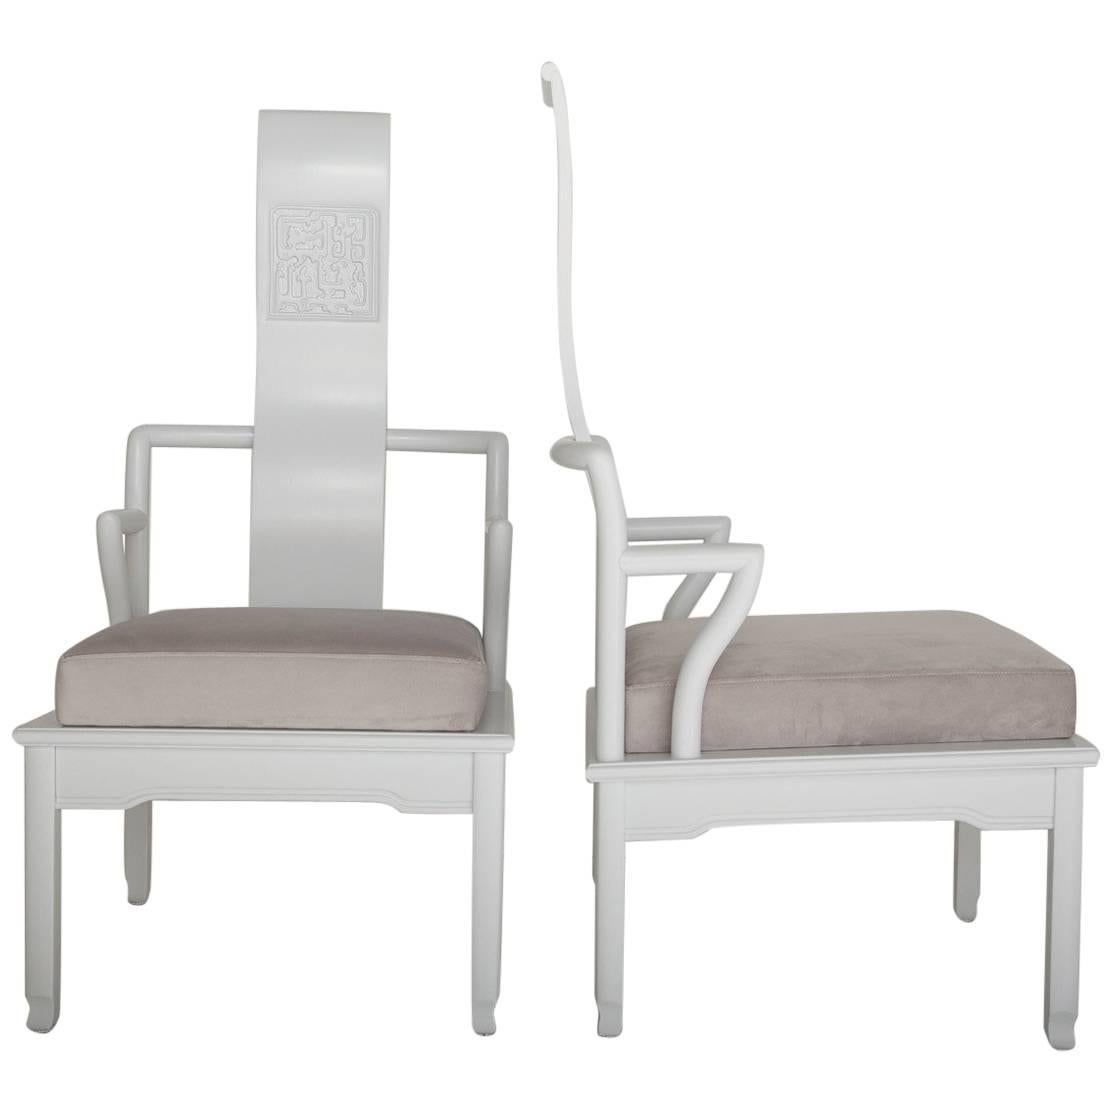 Pair of Low Asian Inspired Accent Chairs in the Manner of James Mont